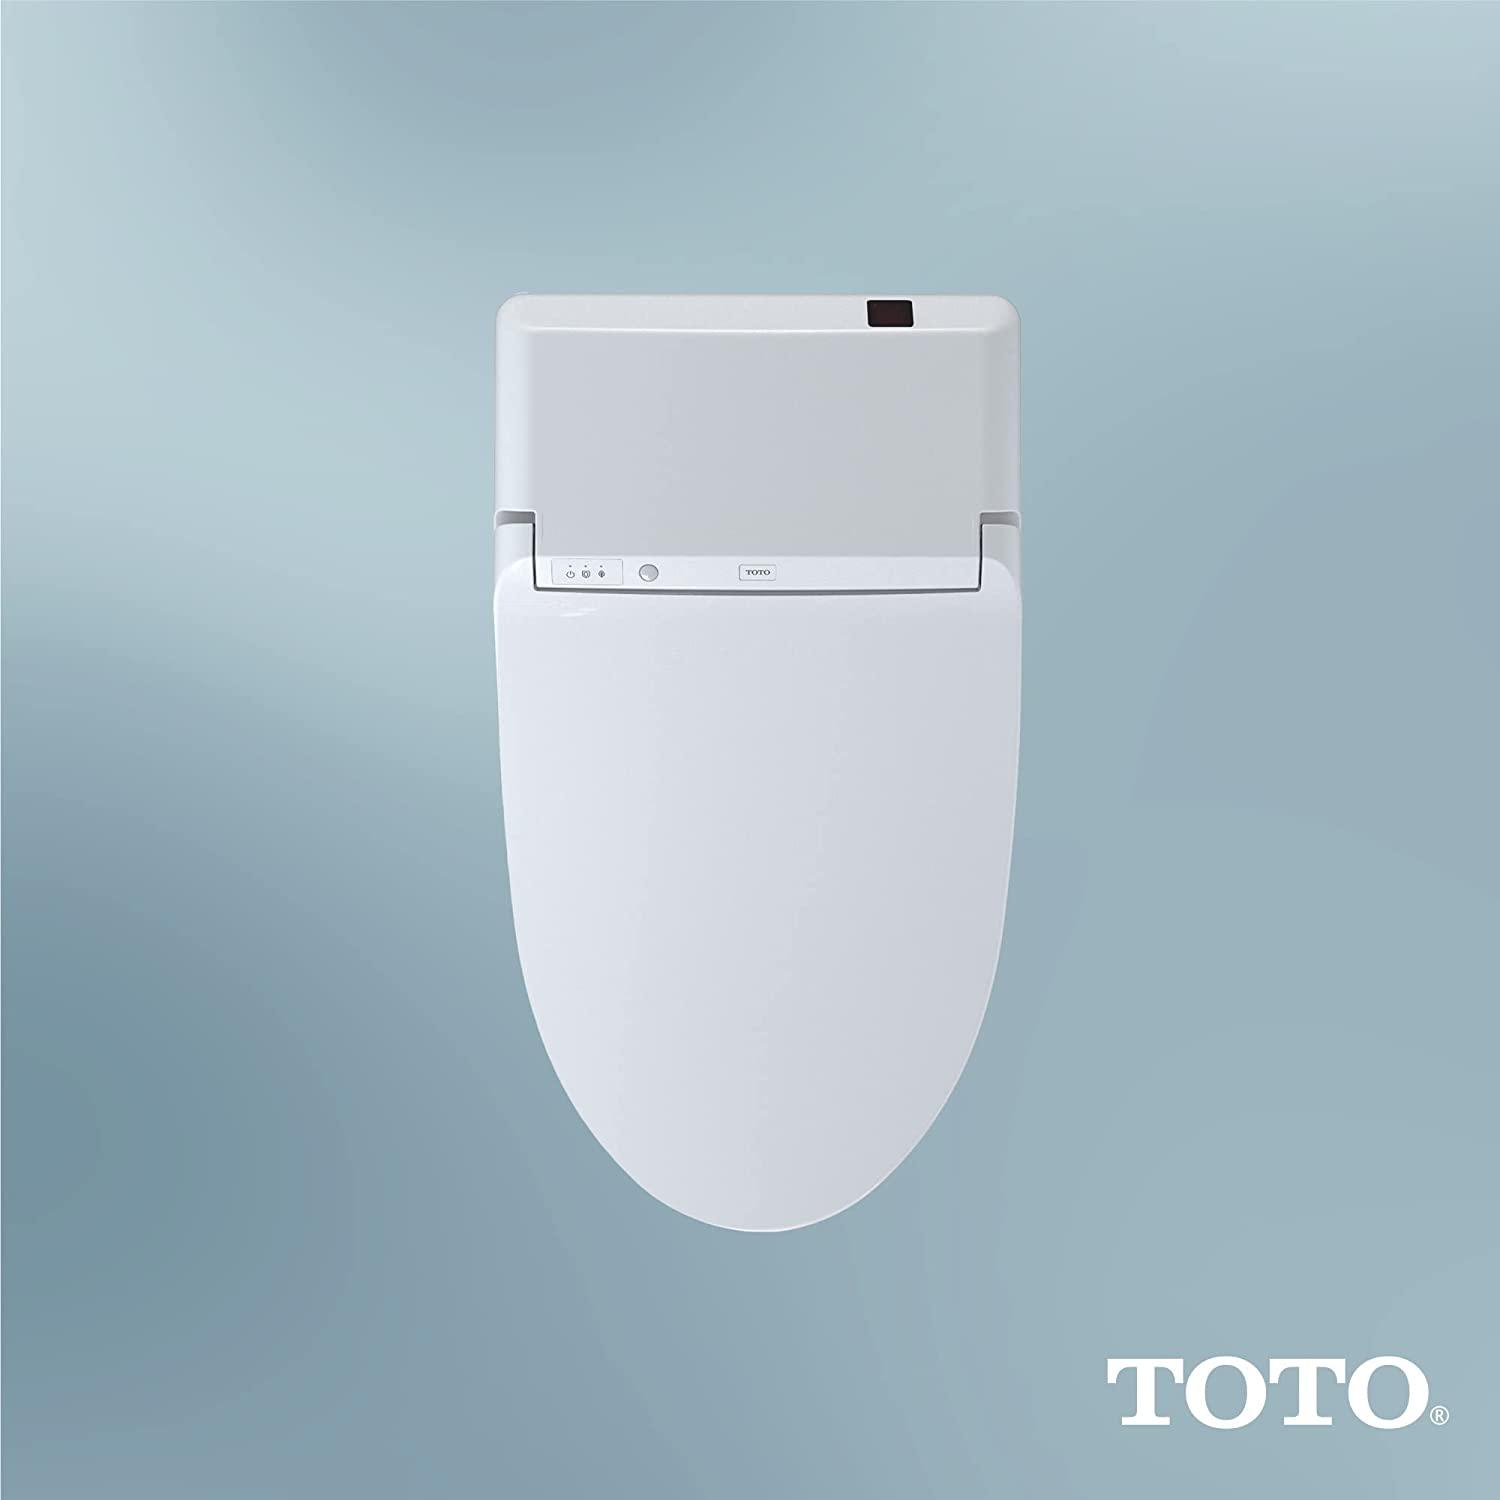 TOTO WASHLET G450 1.0 or 0.8 GPF Toilet with Integrated Bidet Seat and CEFIONTECT®, Cotton White - YOURISHOP.COM